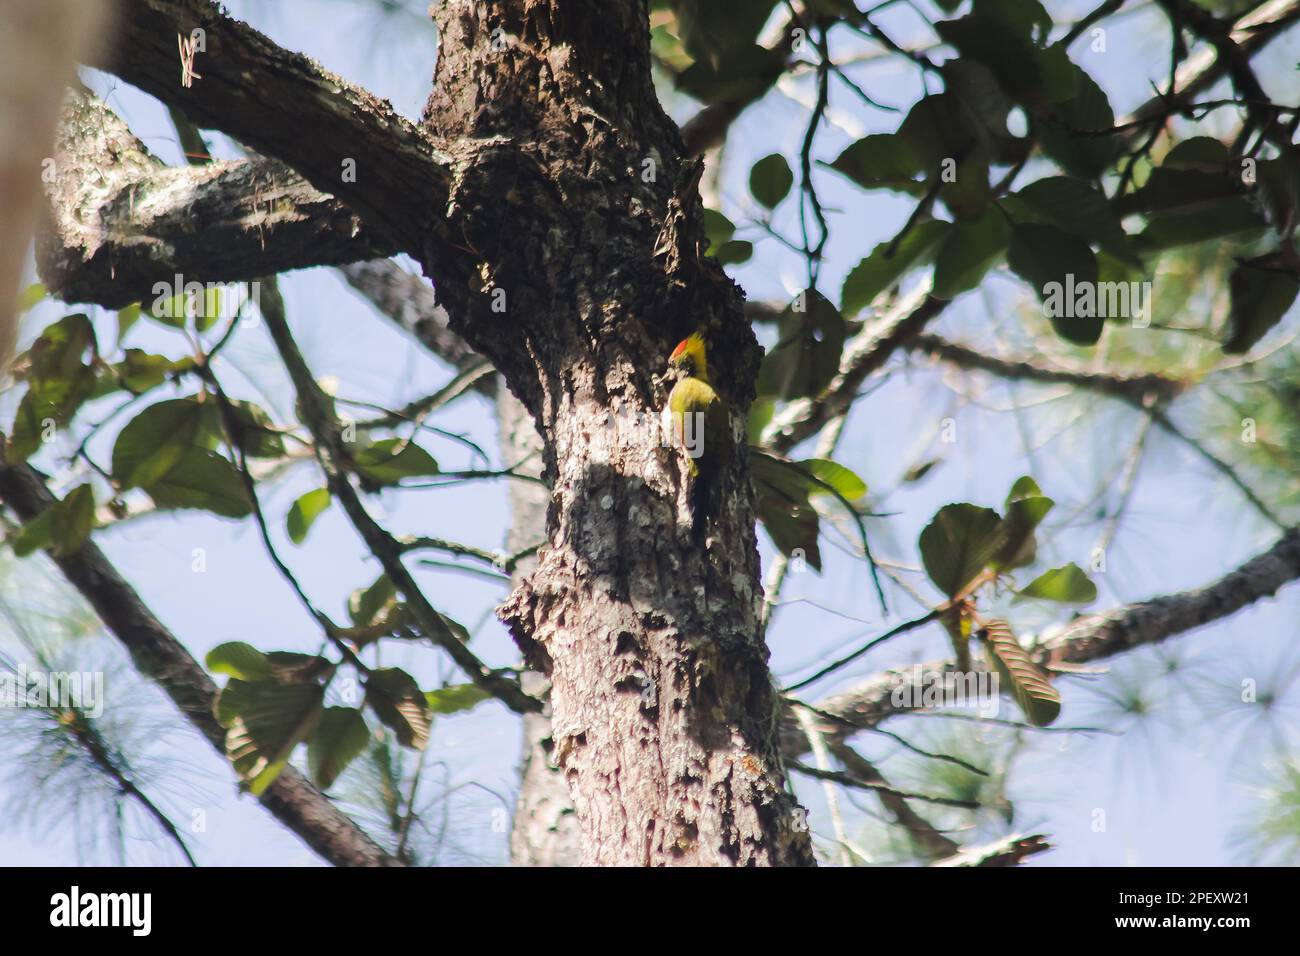 Megalaima asiatica drilling trees into holes like a woodpecker. To build a nest Stock Photo